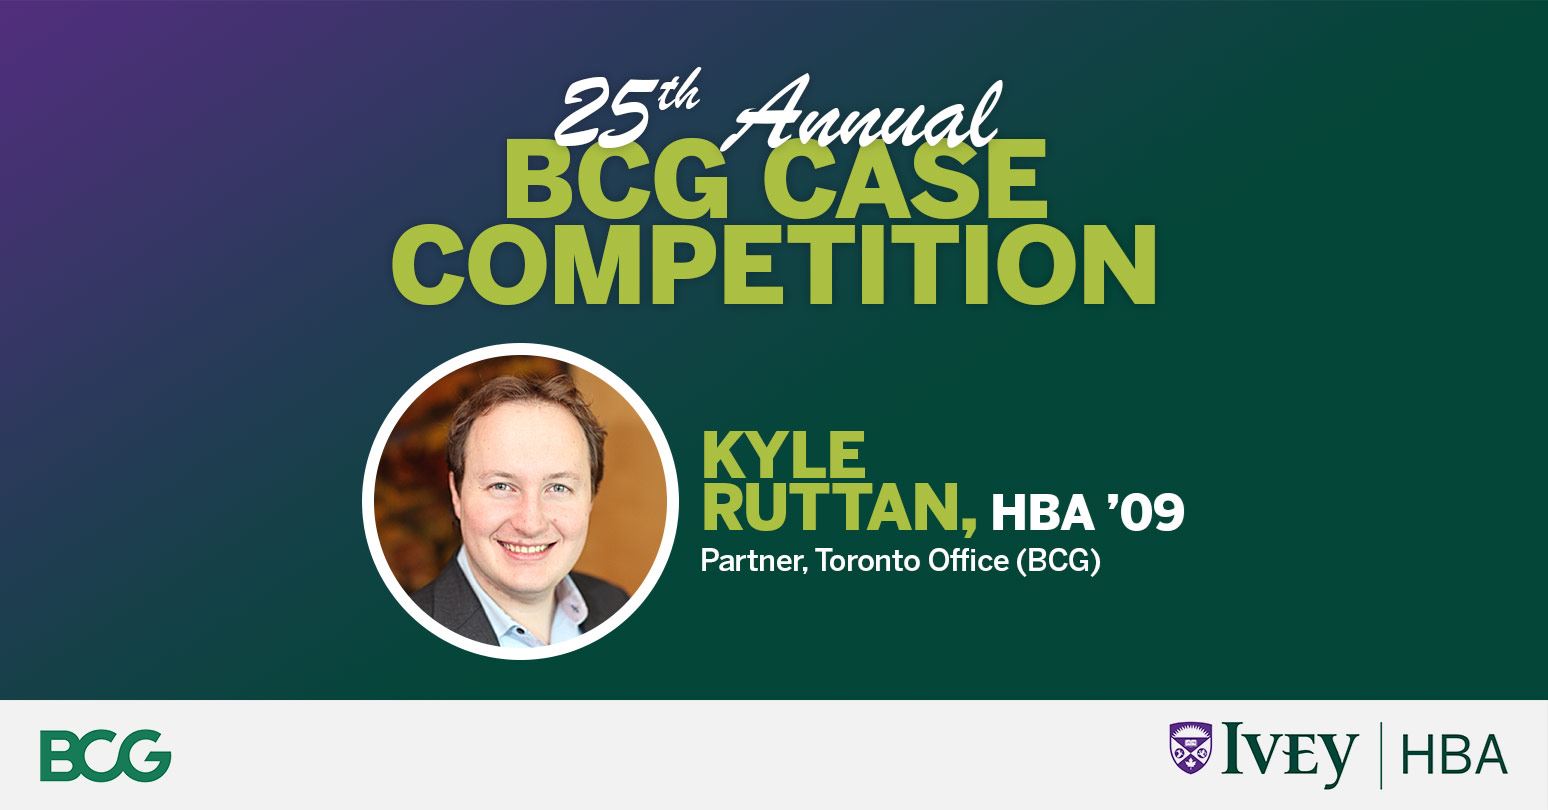 bcg case study competition